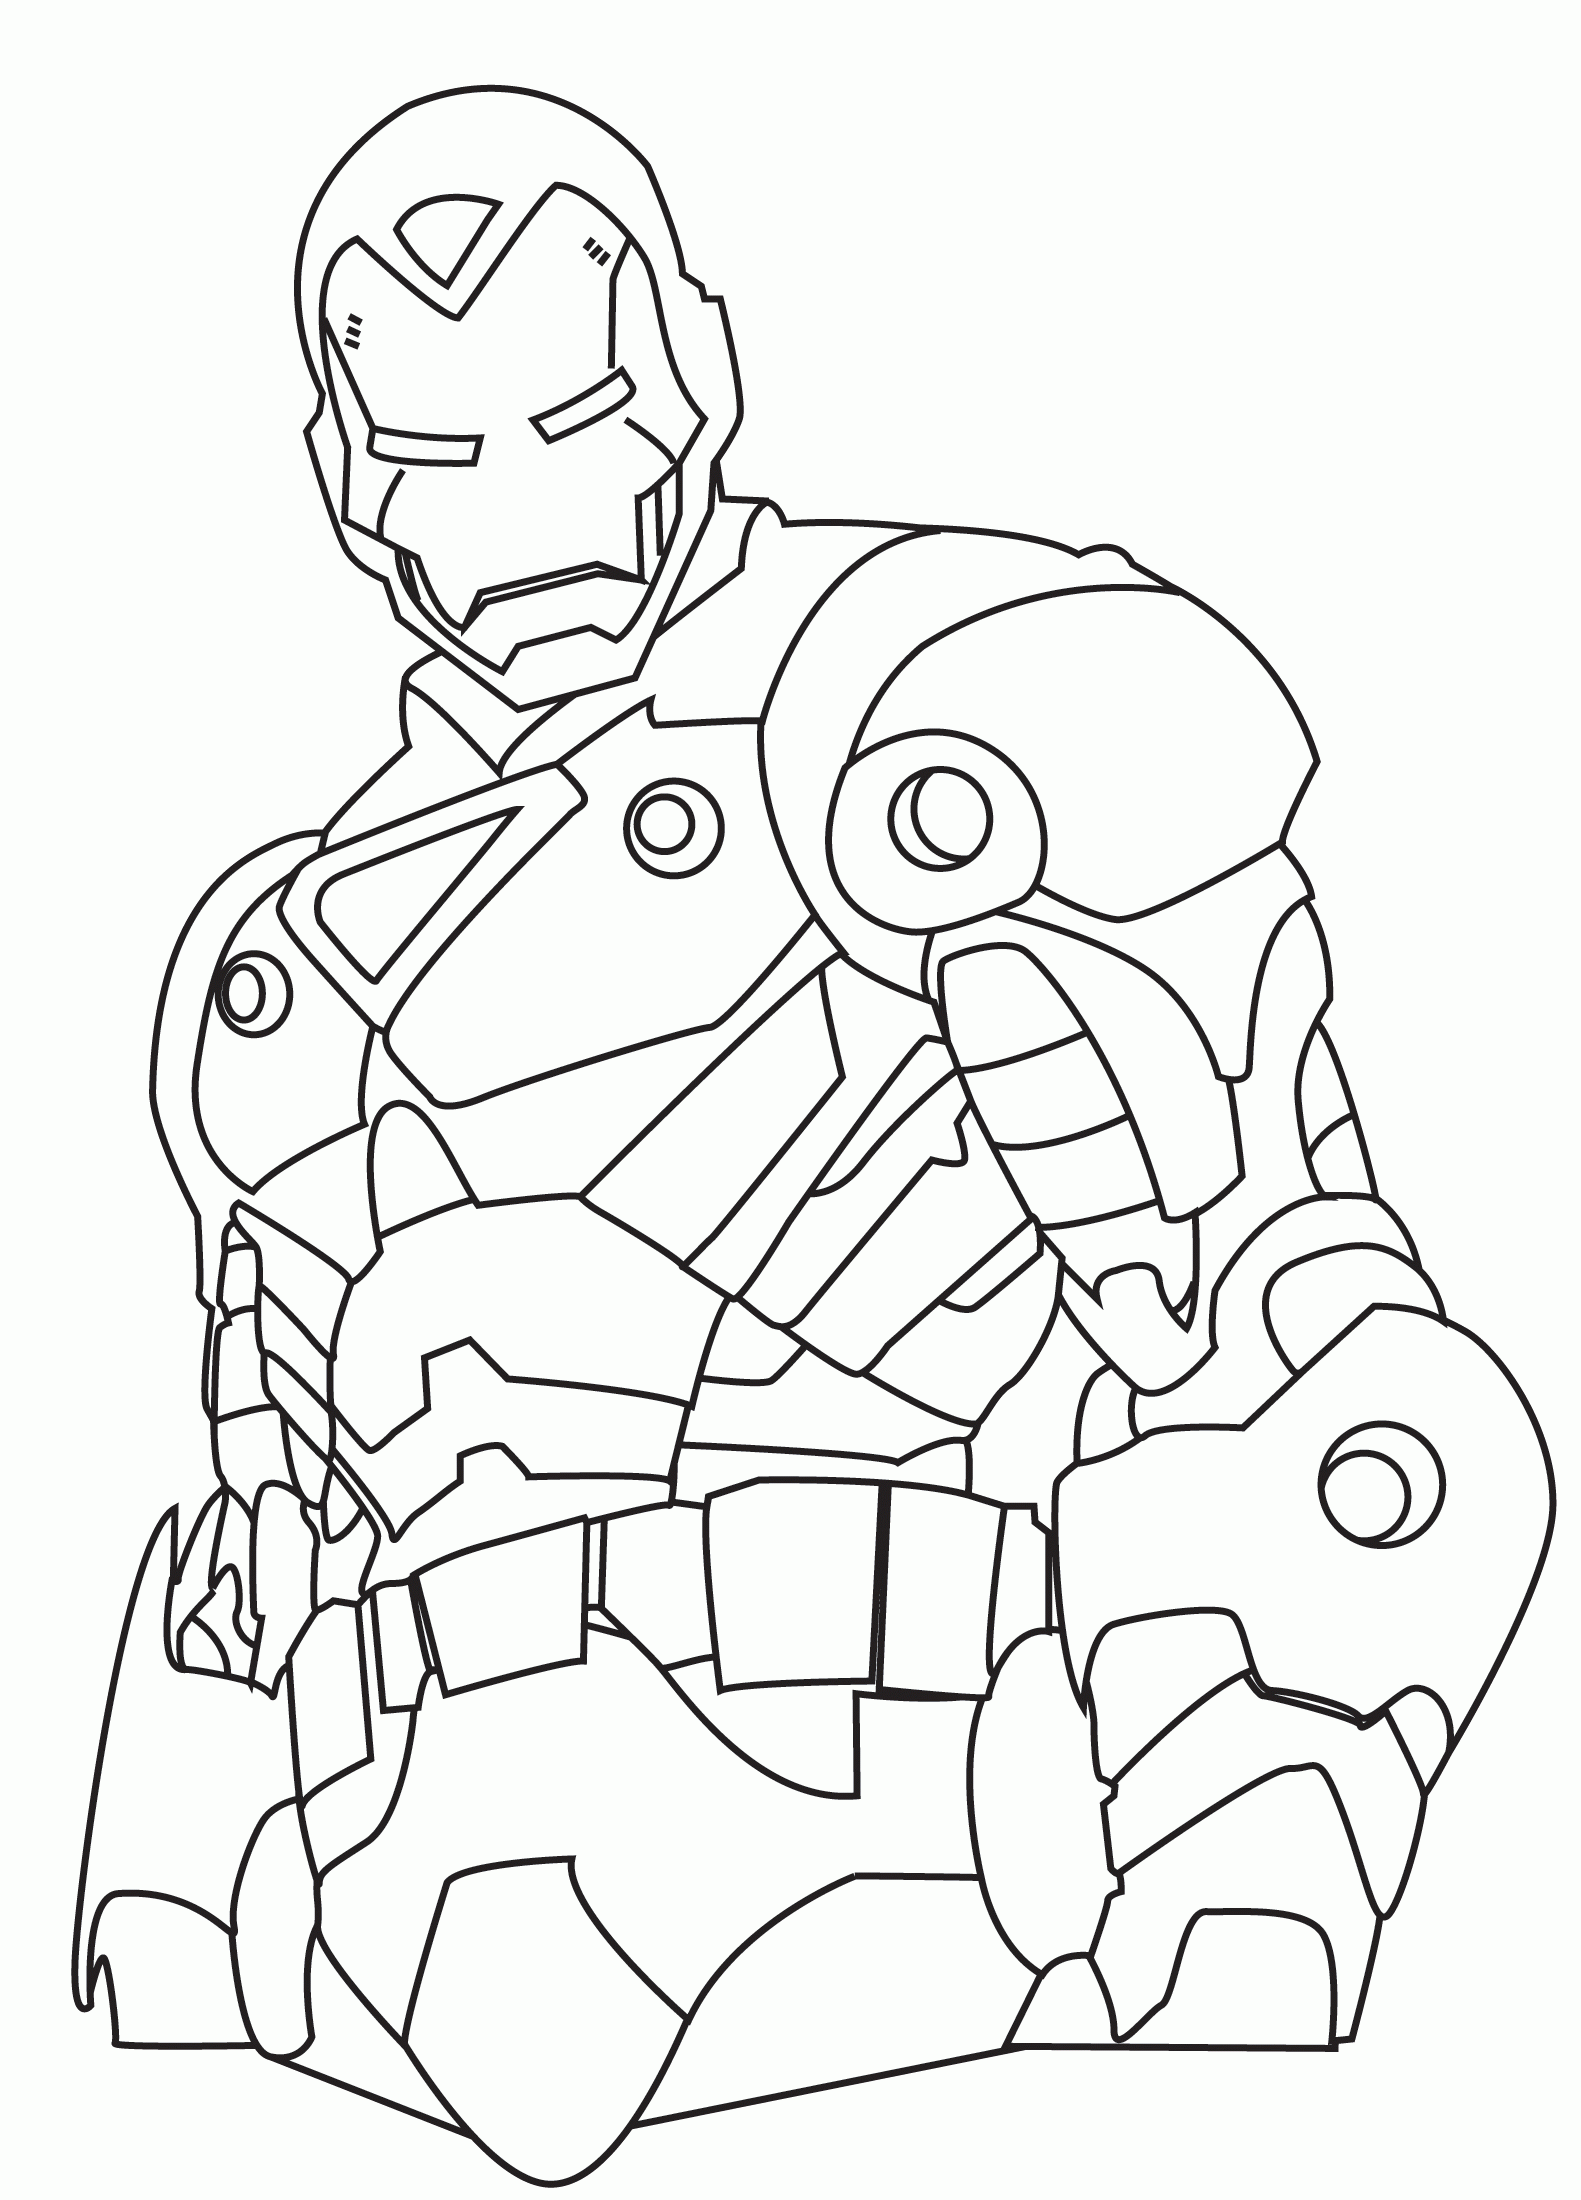 How to draw Iron Man in 2 options Easy and Simple